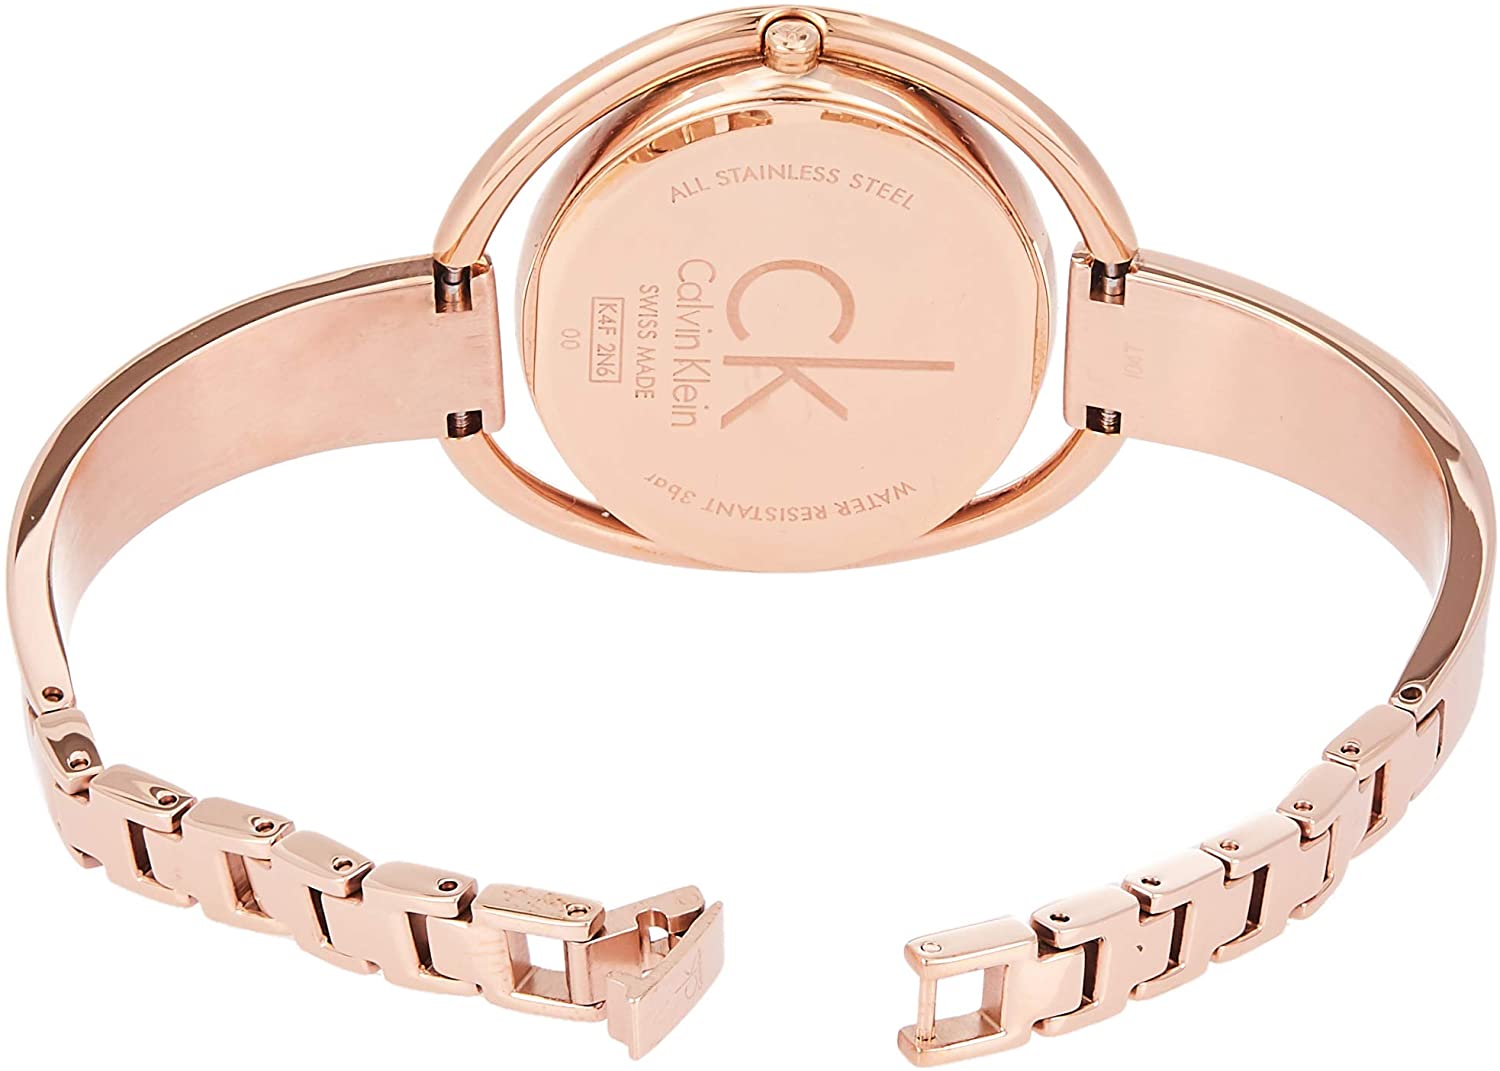 NEW Calvin Klein Impetuous PVD Ladies Watches - Gold K4F2N616 全新Calvin Klein Impetuous系列PVD 女士手錶 - 金色 K4F2N616